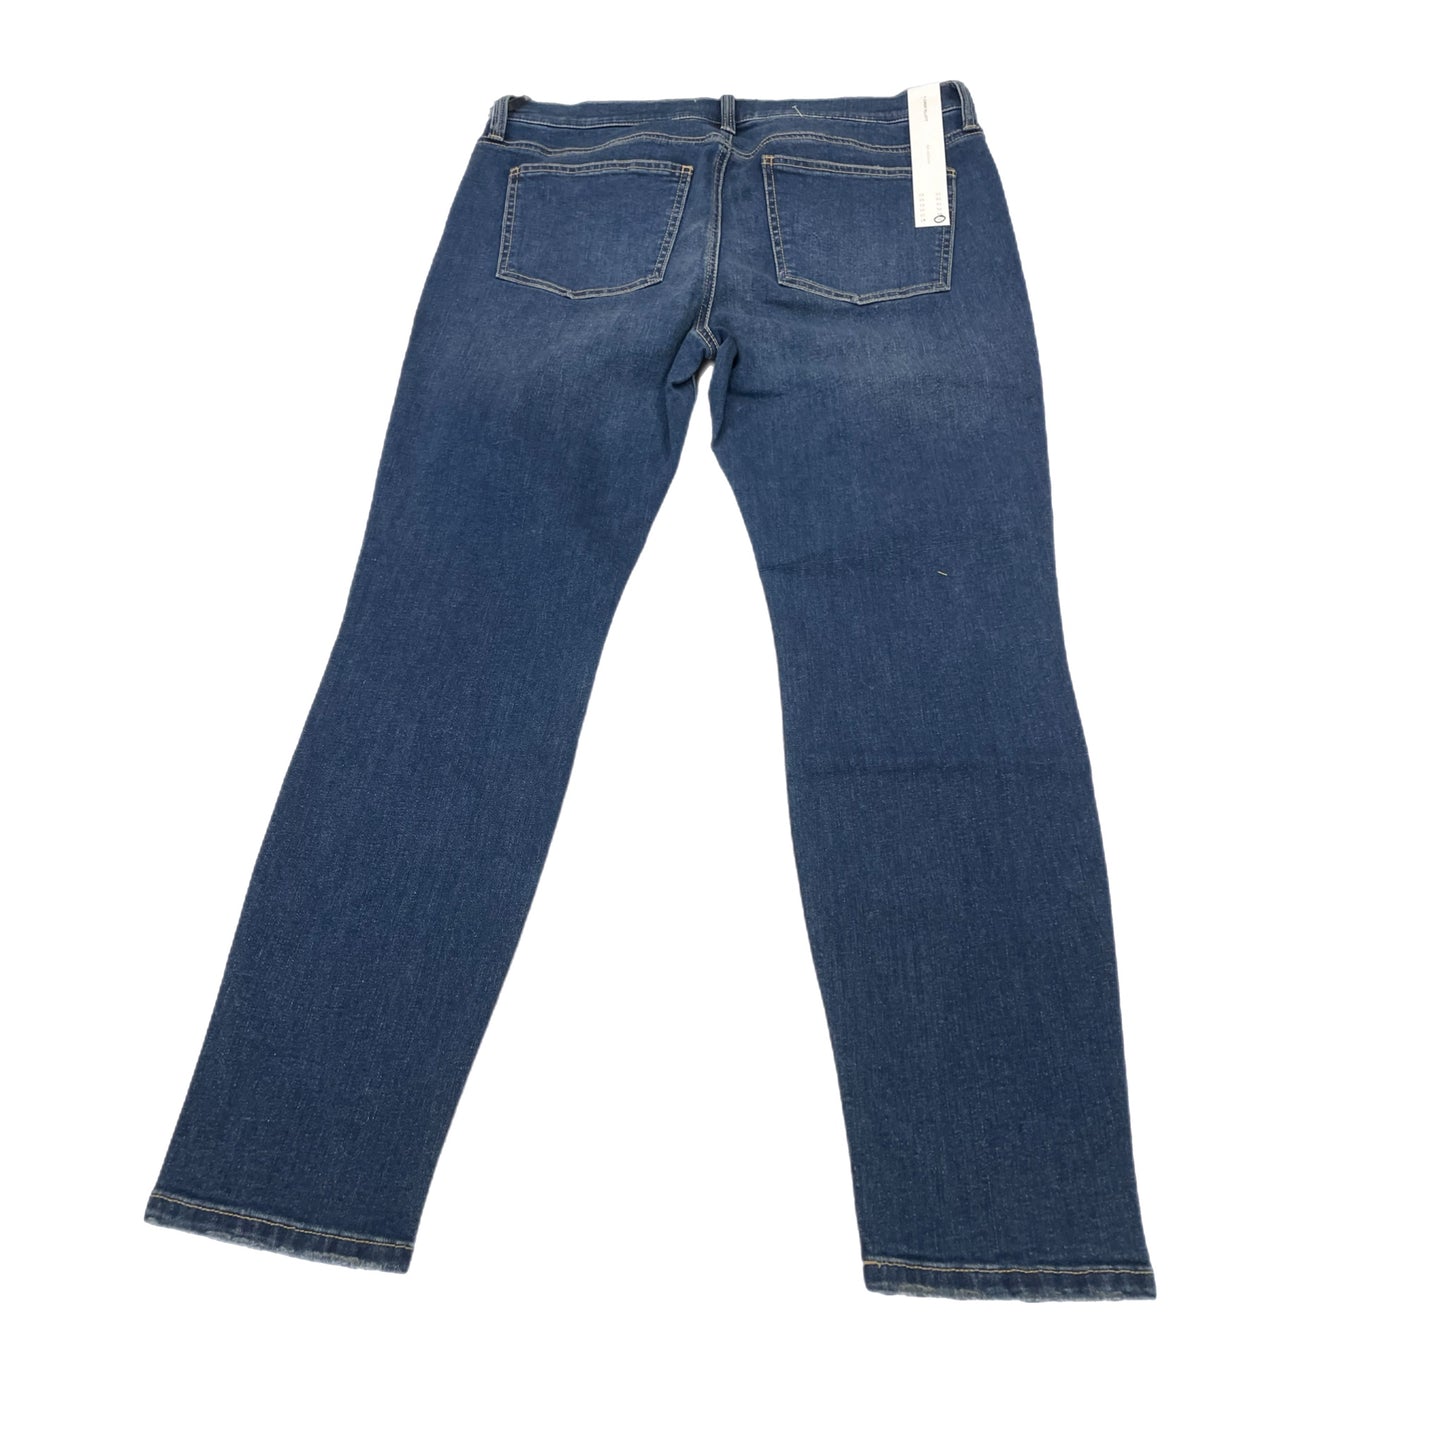 Jeans Skinny By Current Elliott  Size: 18